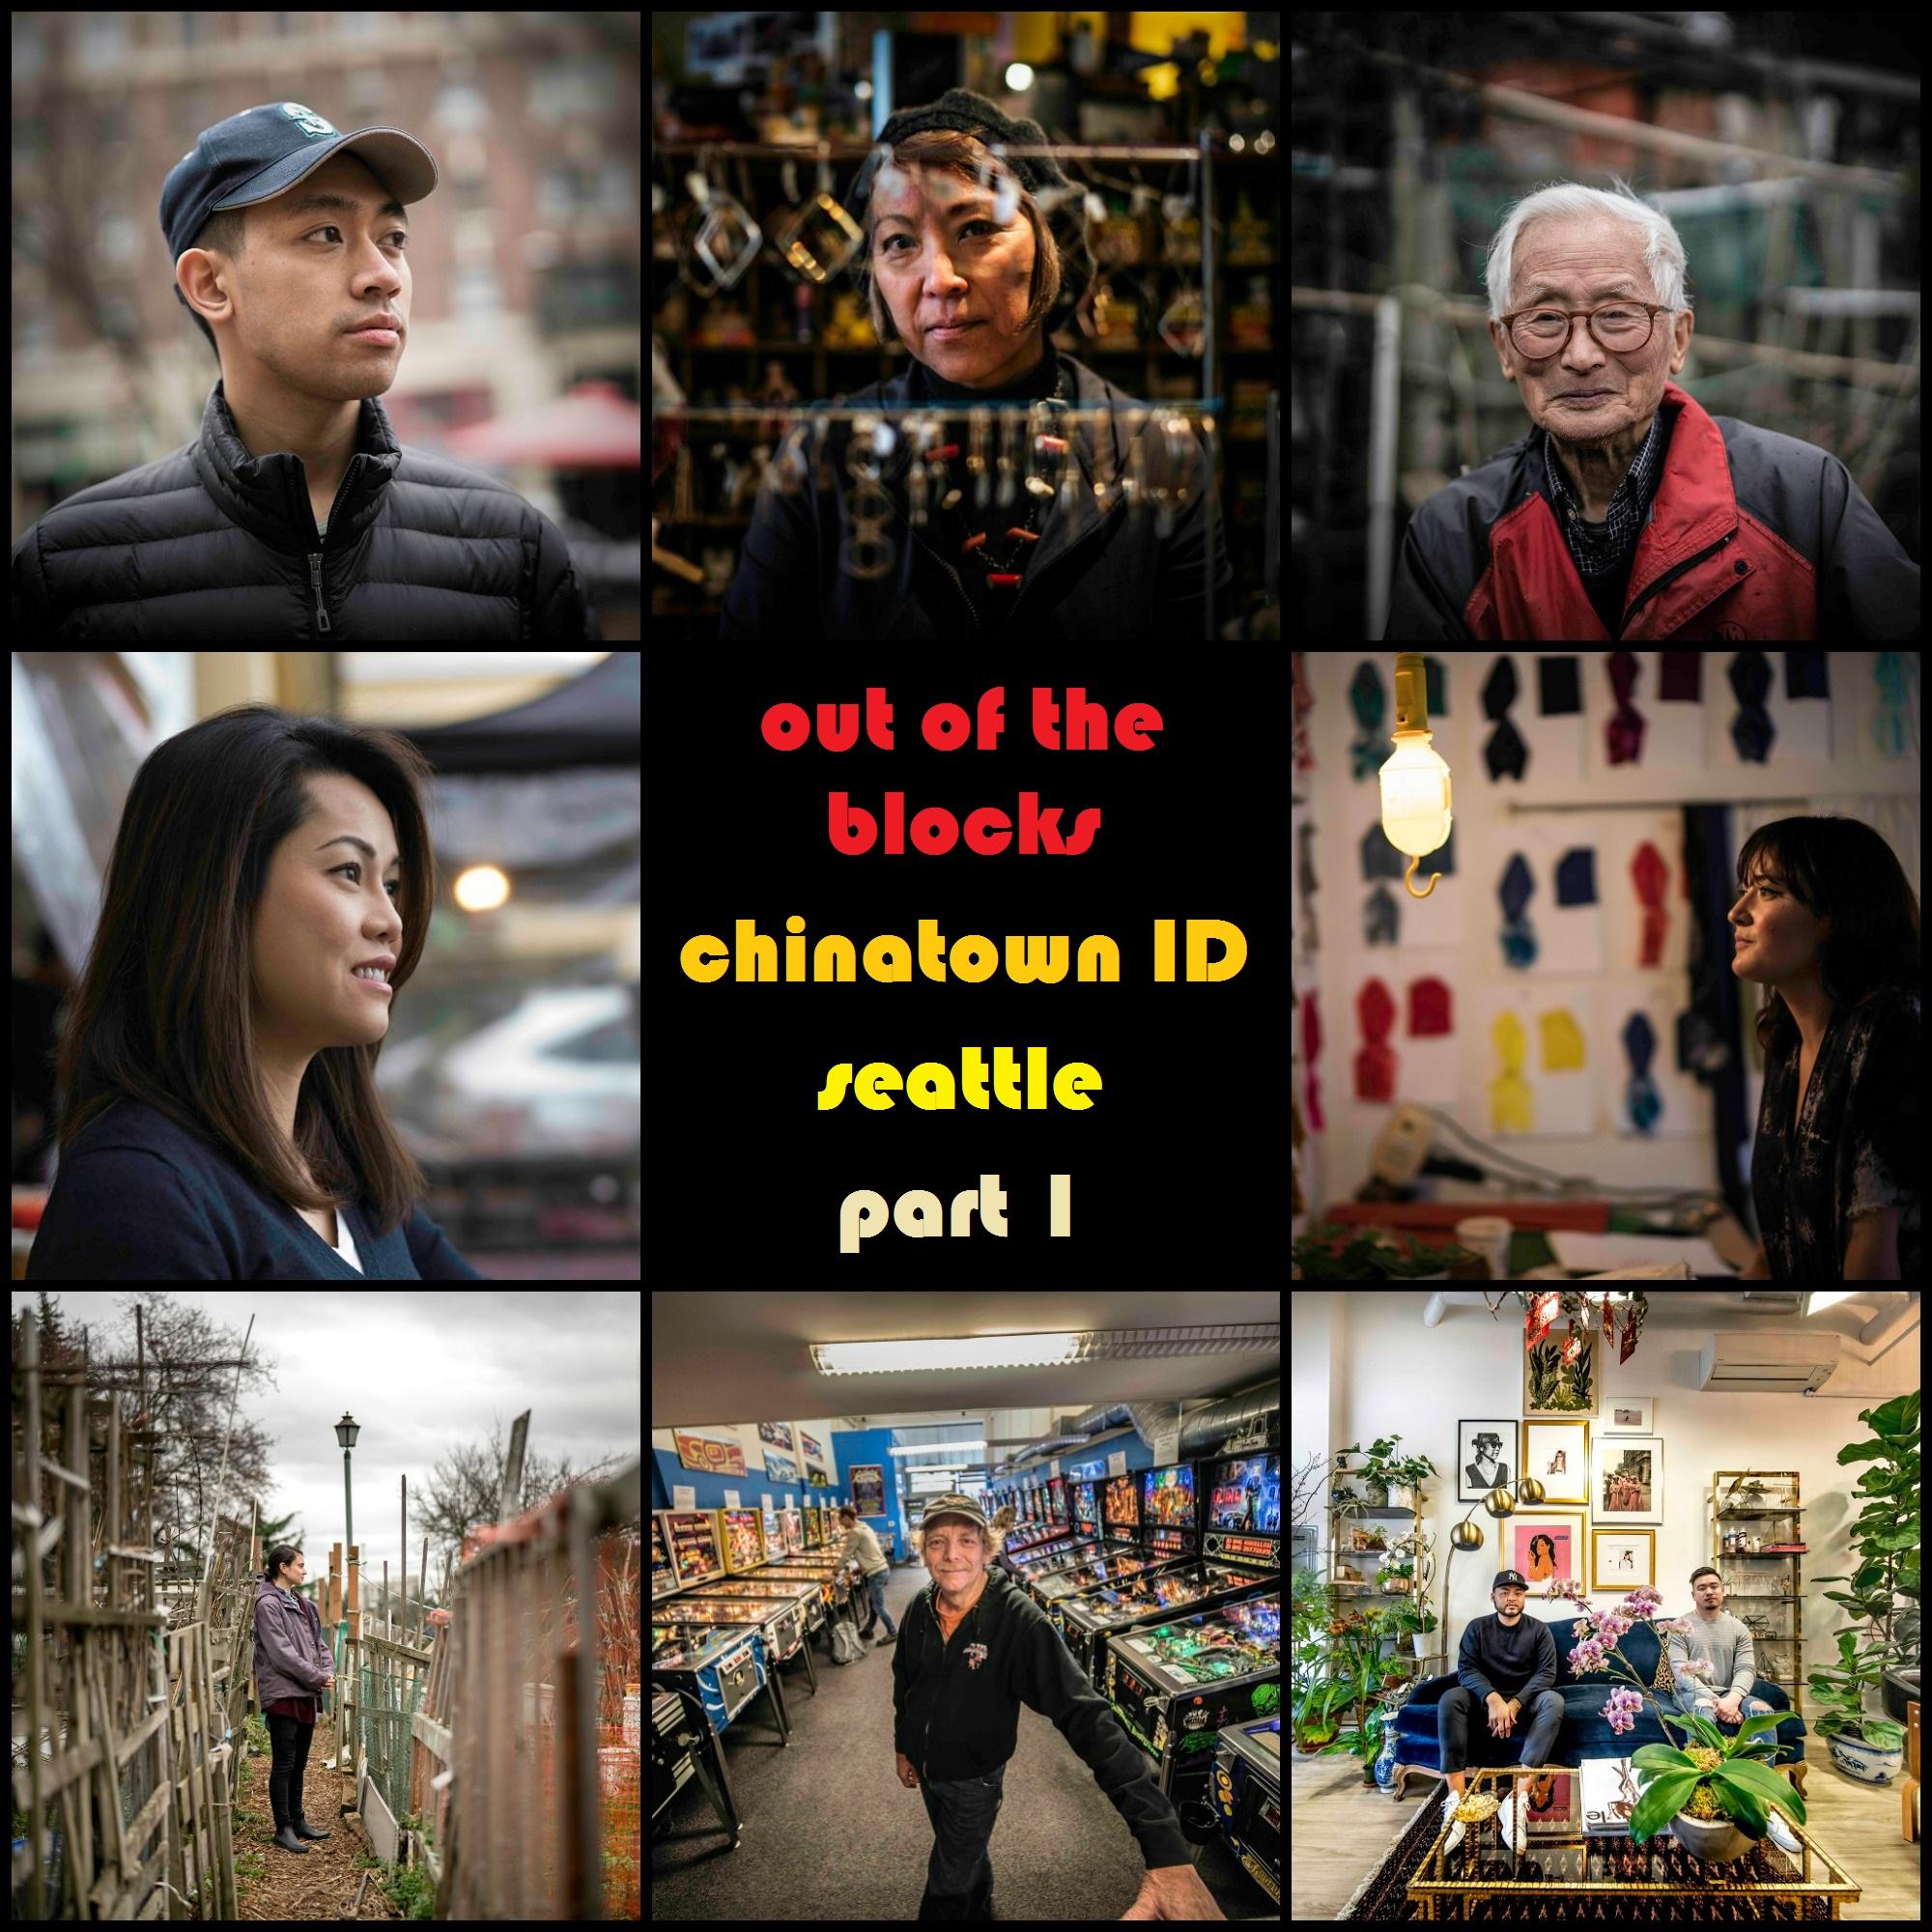 Thumbnail for "Chinatown ID, Seattle, part 1".